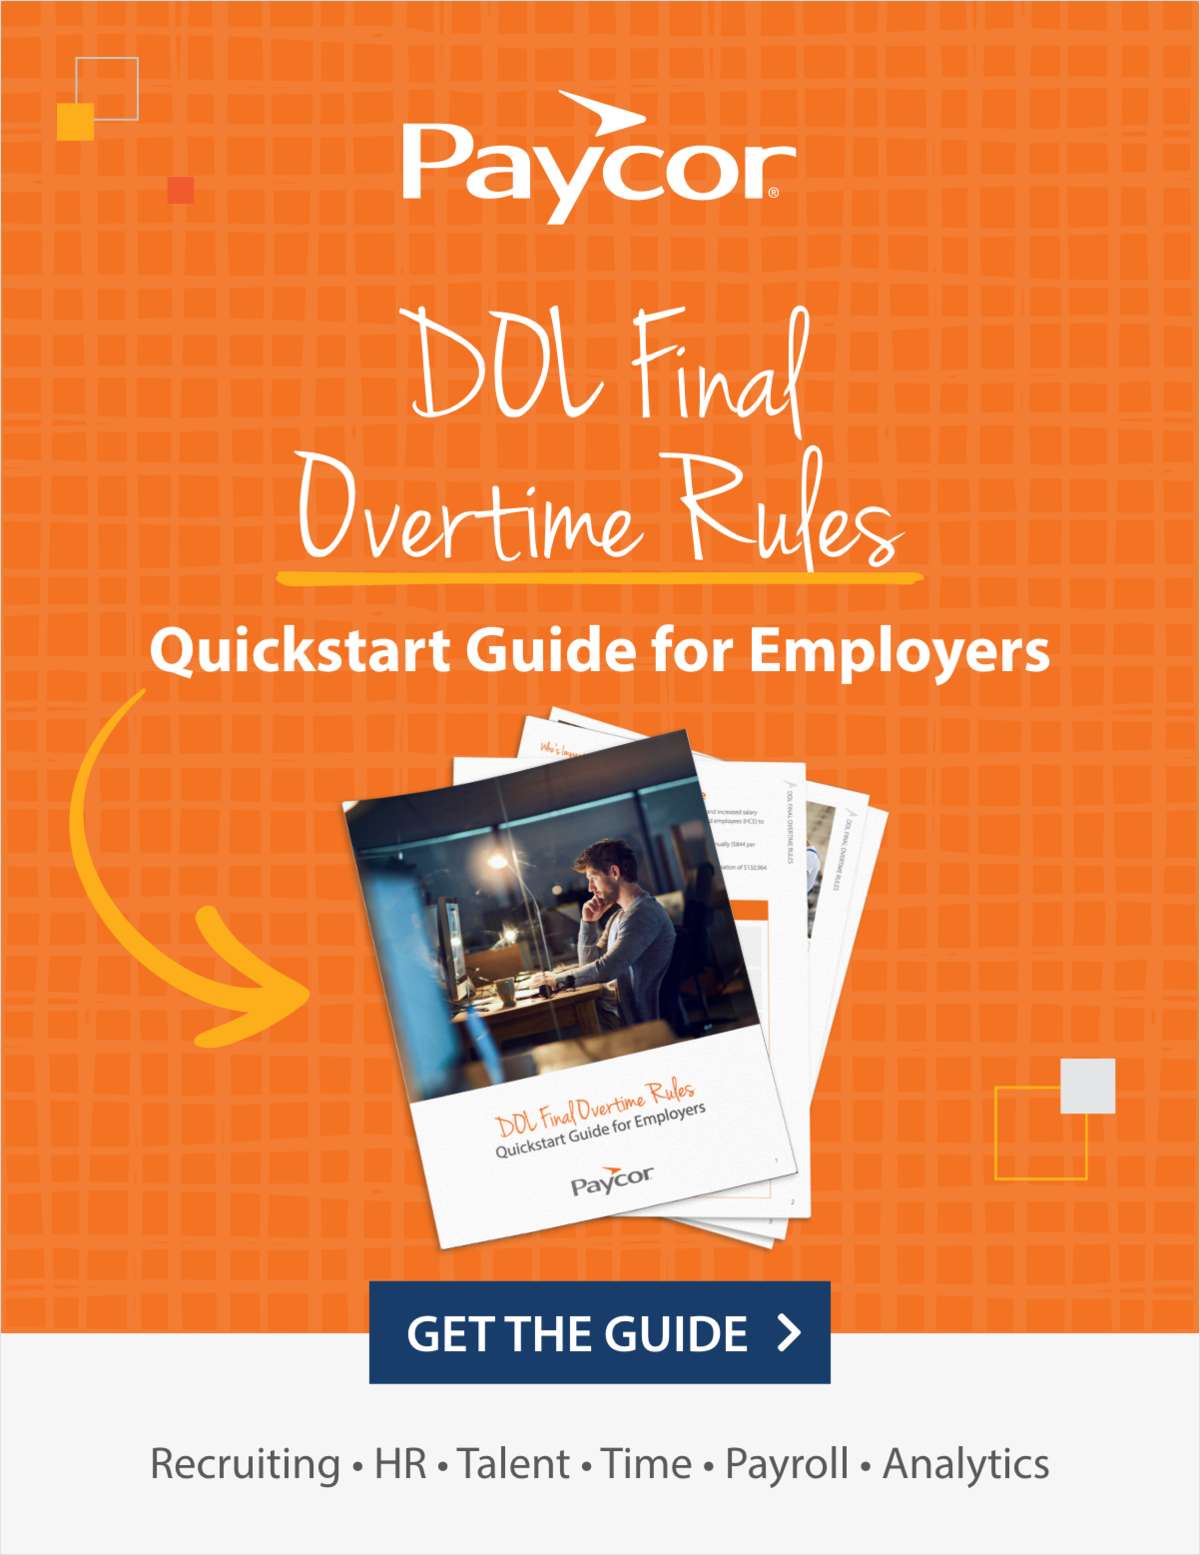 DOL Final Overtime Rules: Guide for Employers